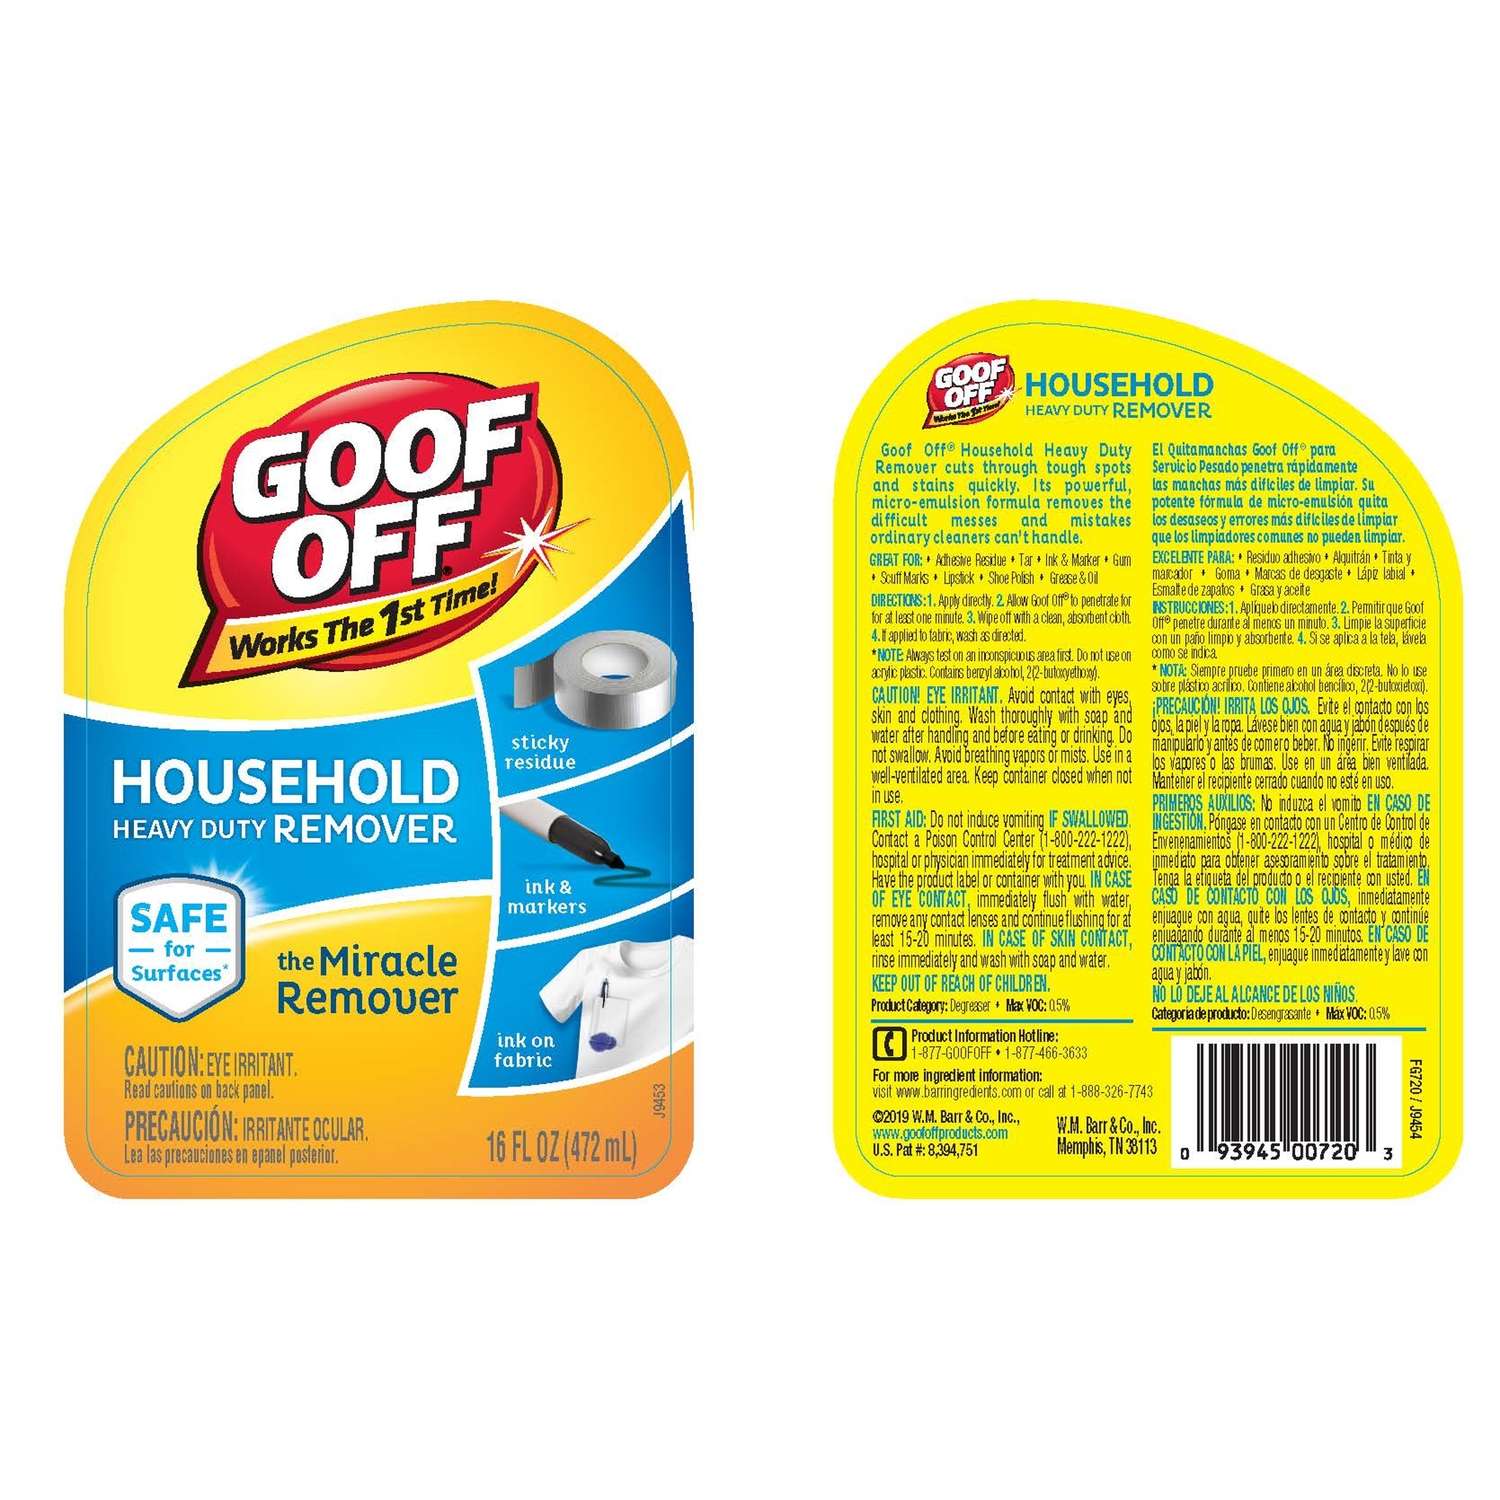 Goof Off Heavy Duty Remover